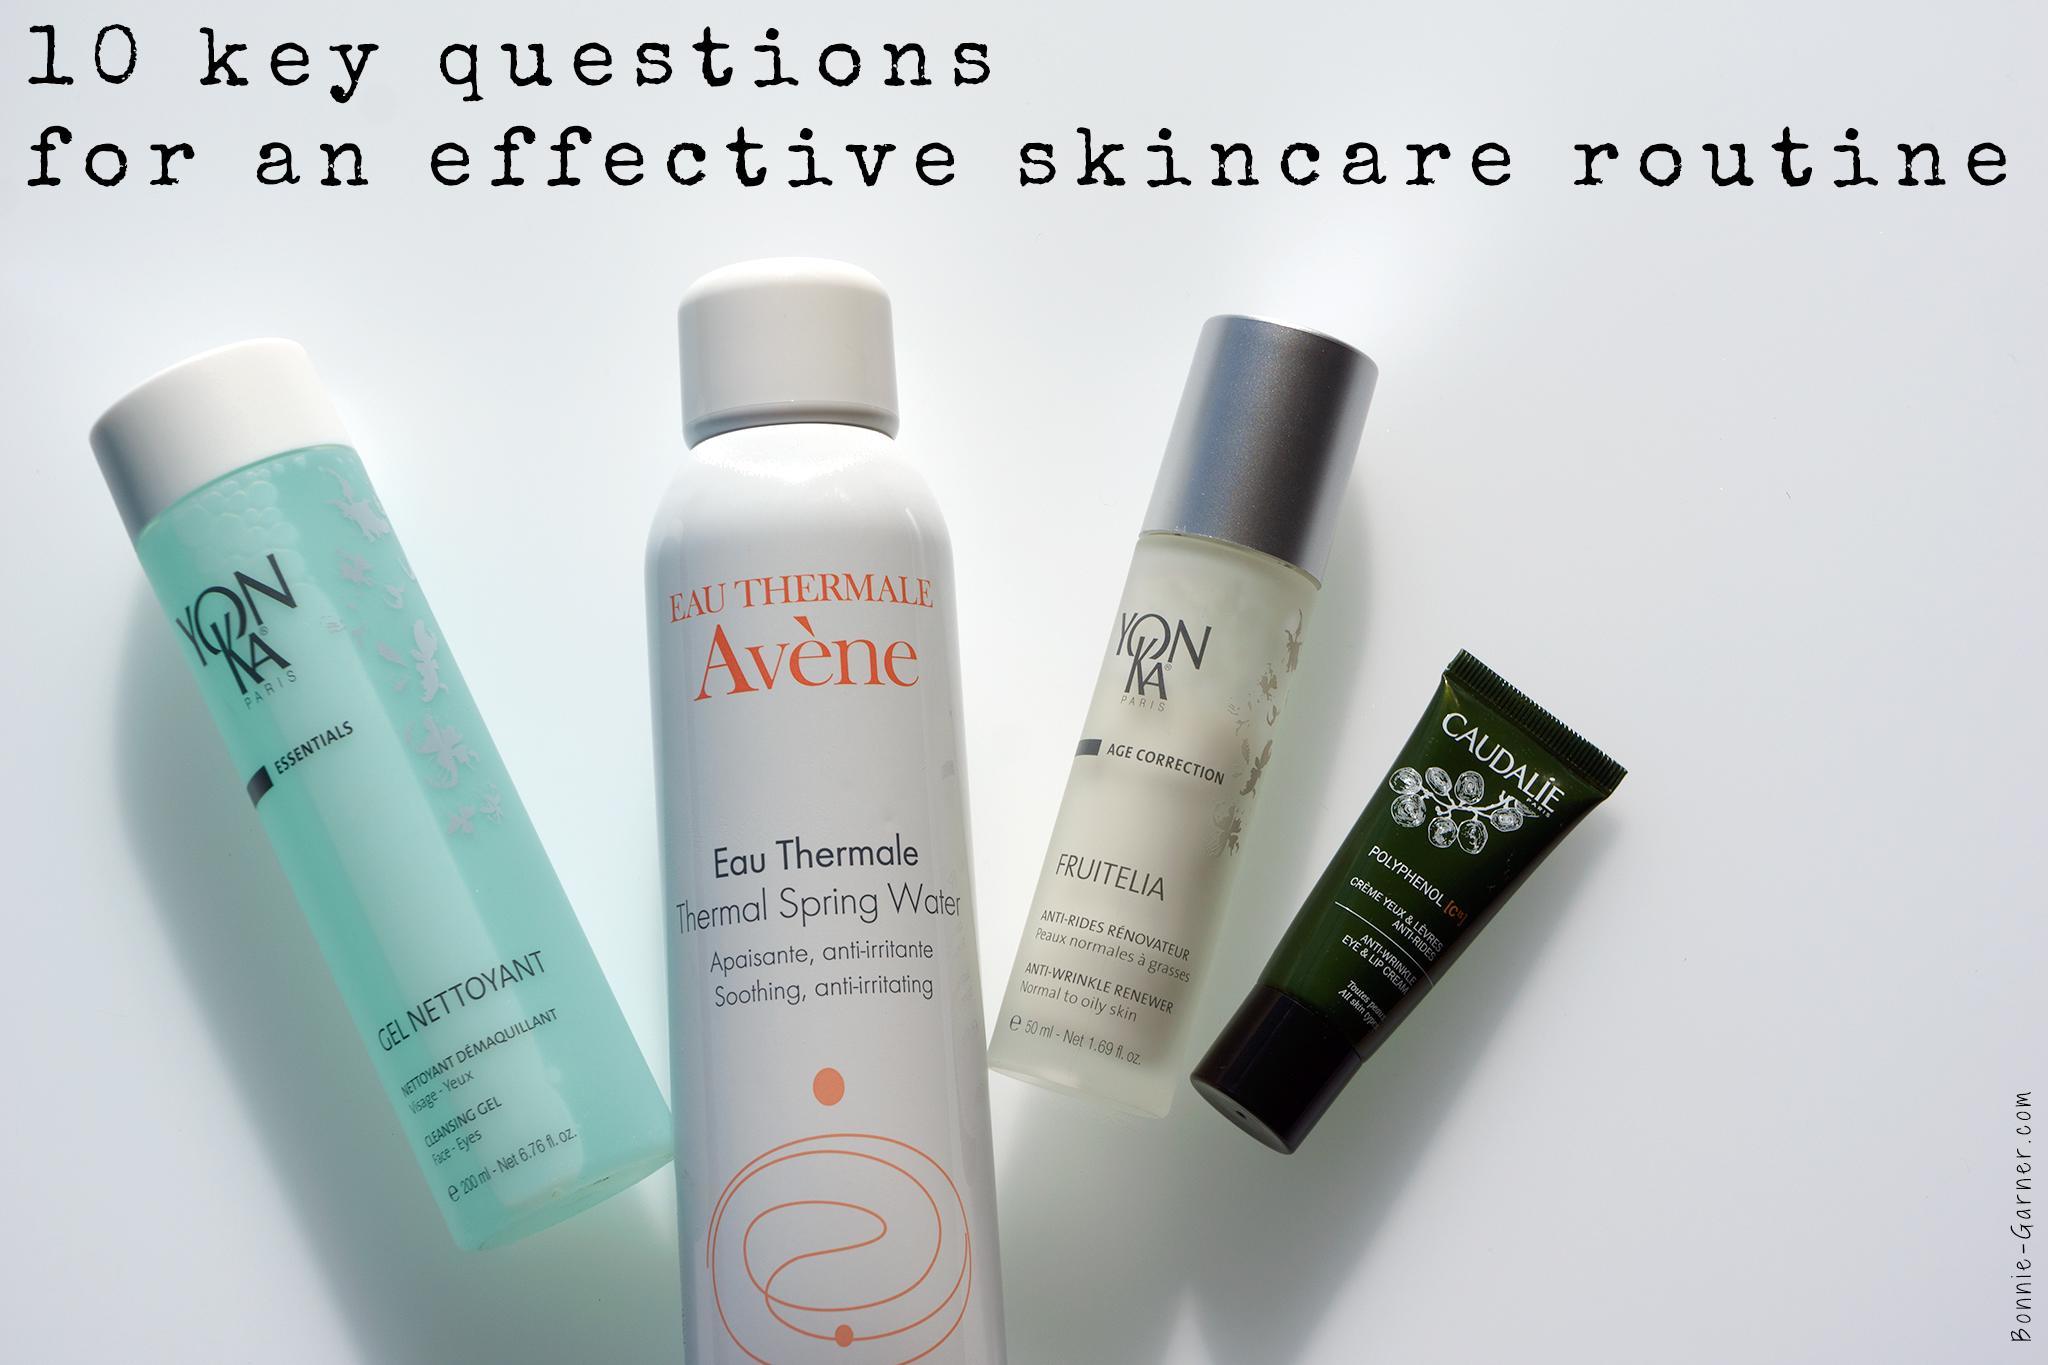 10 key questions for an effective skincare routine